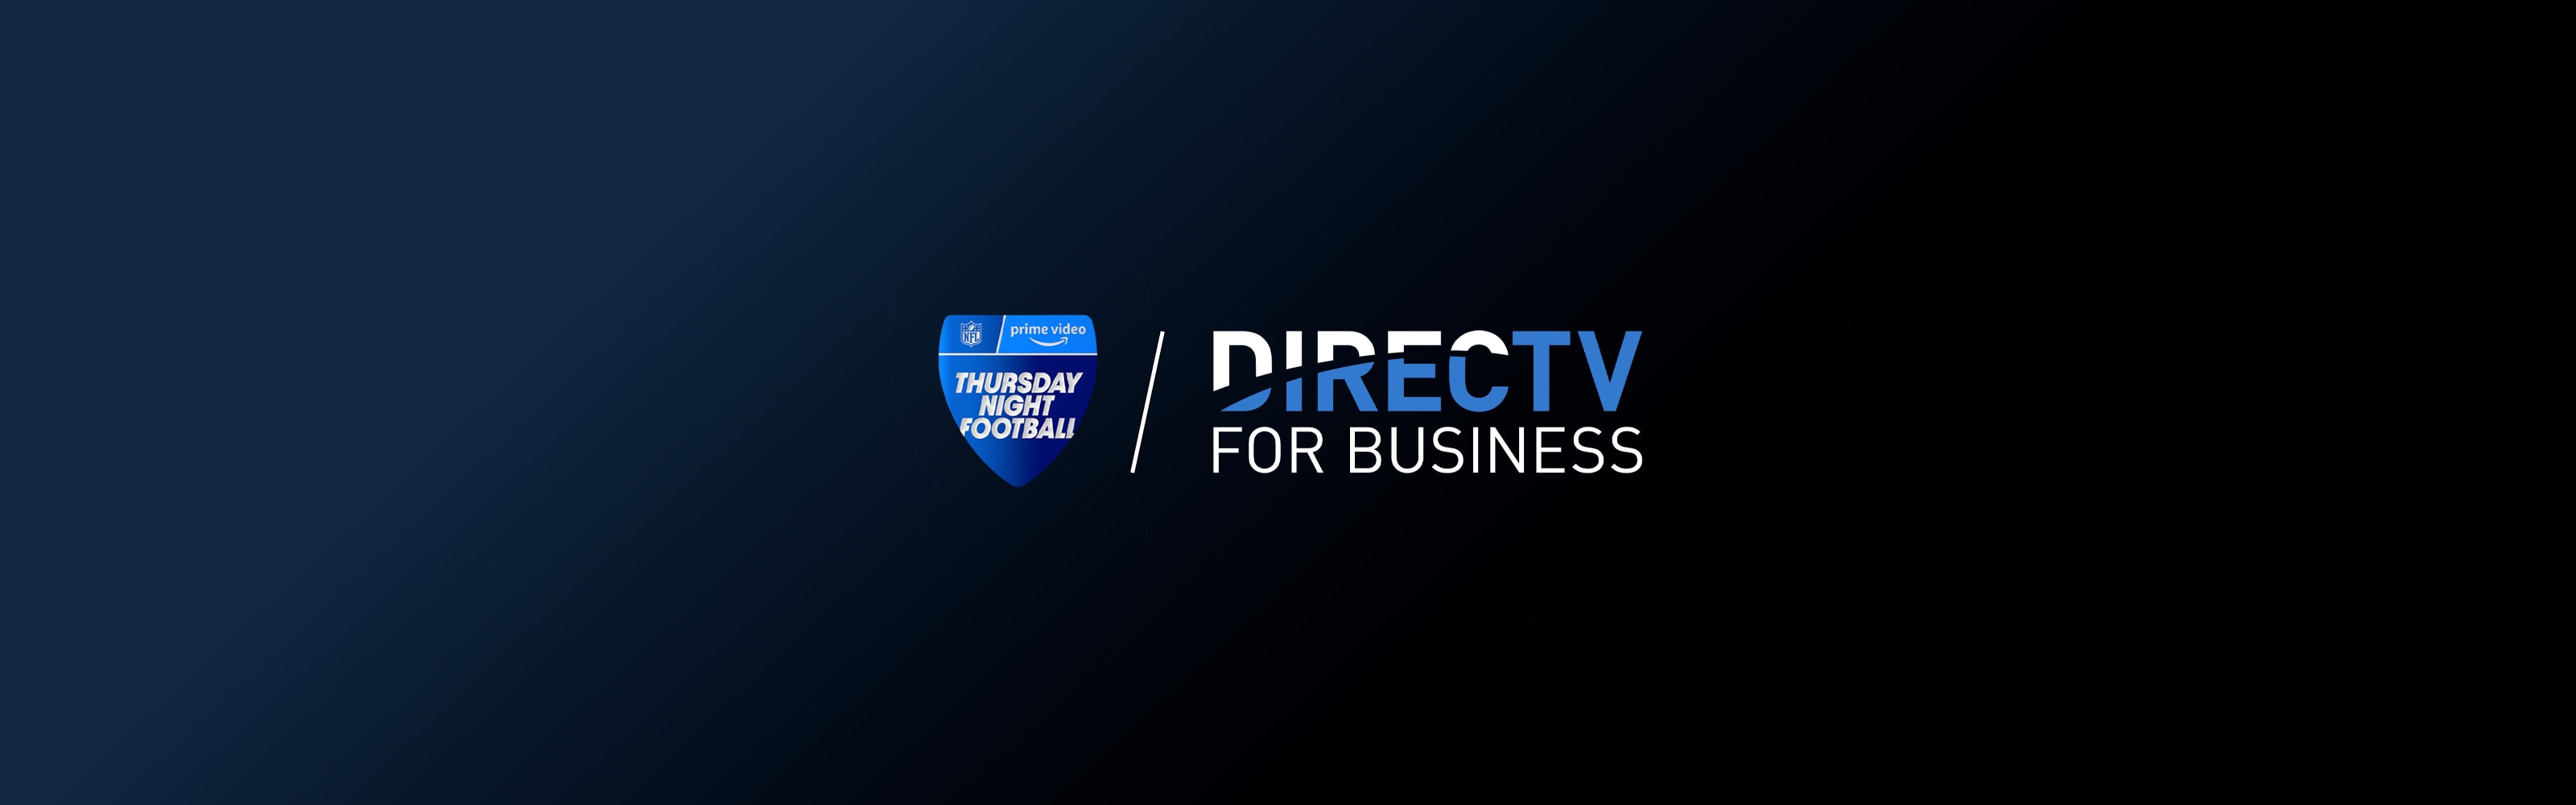 what channel is thursday night football on tonight on directv